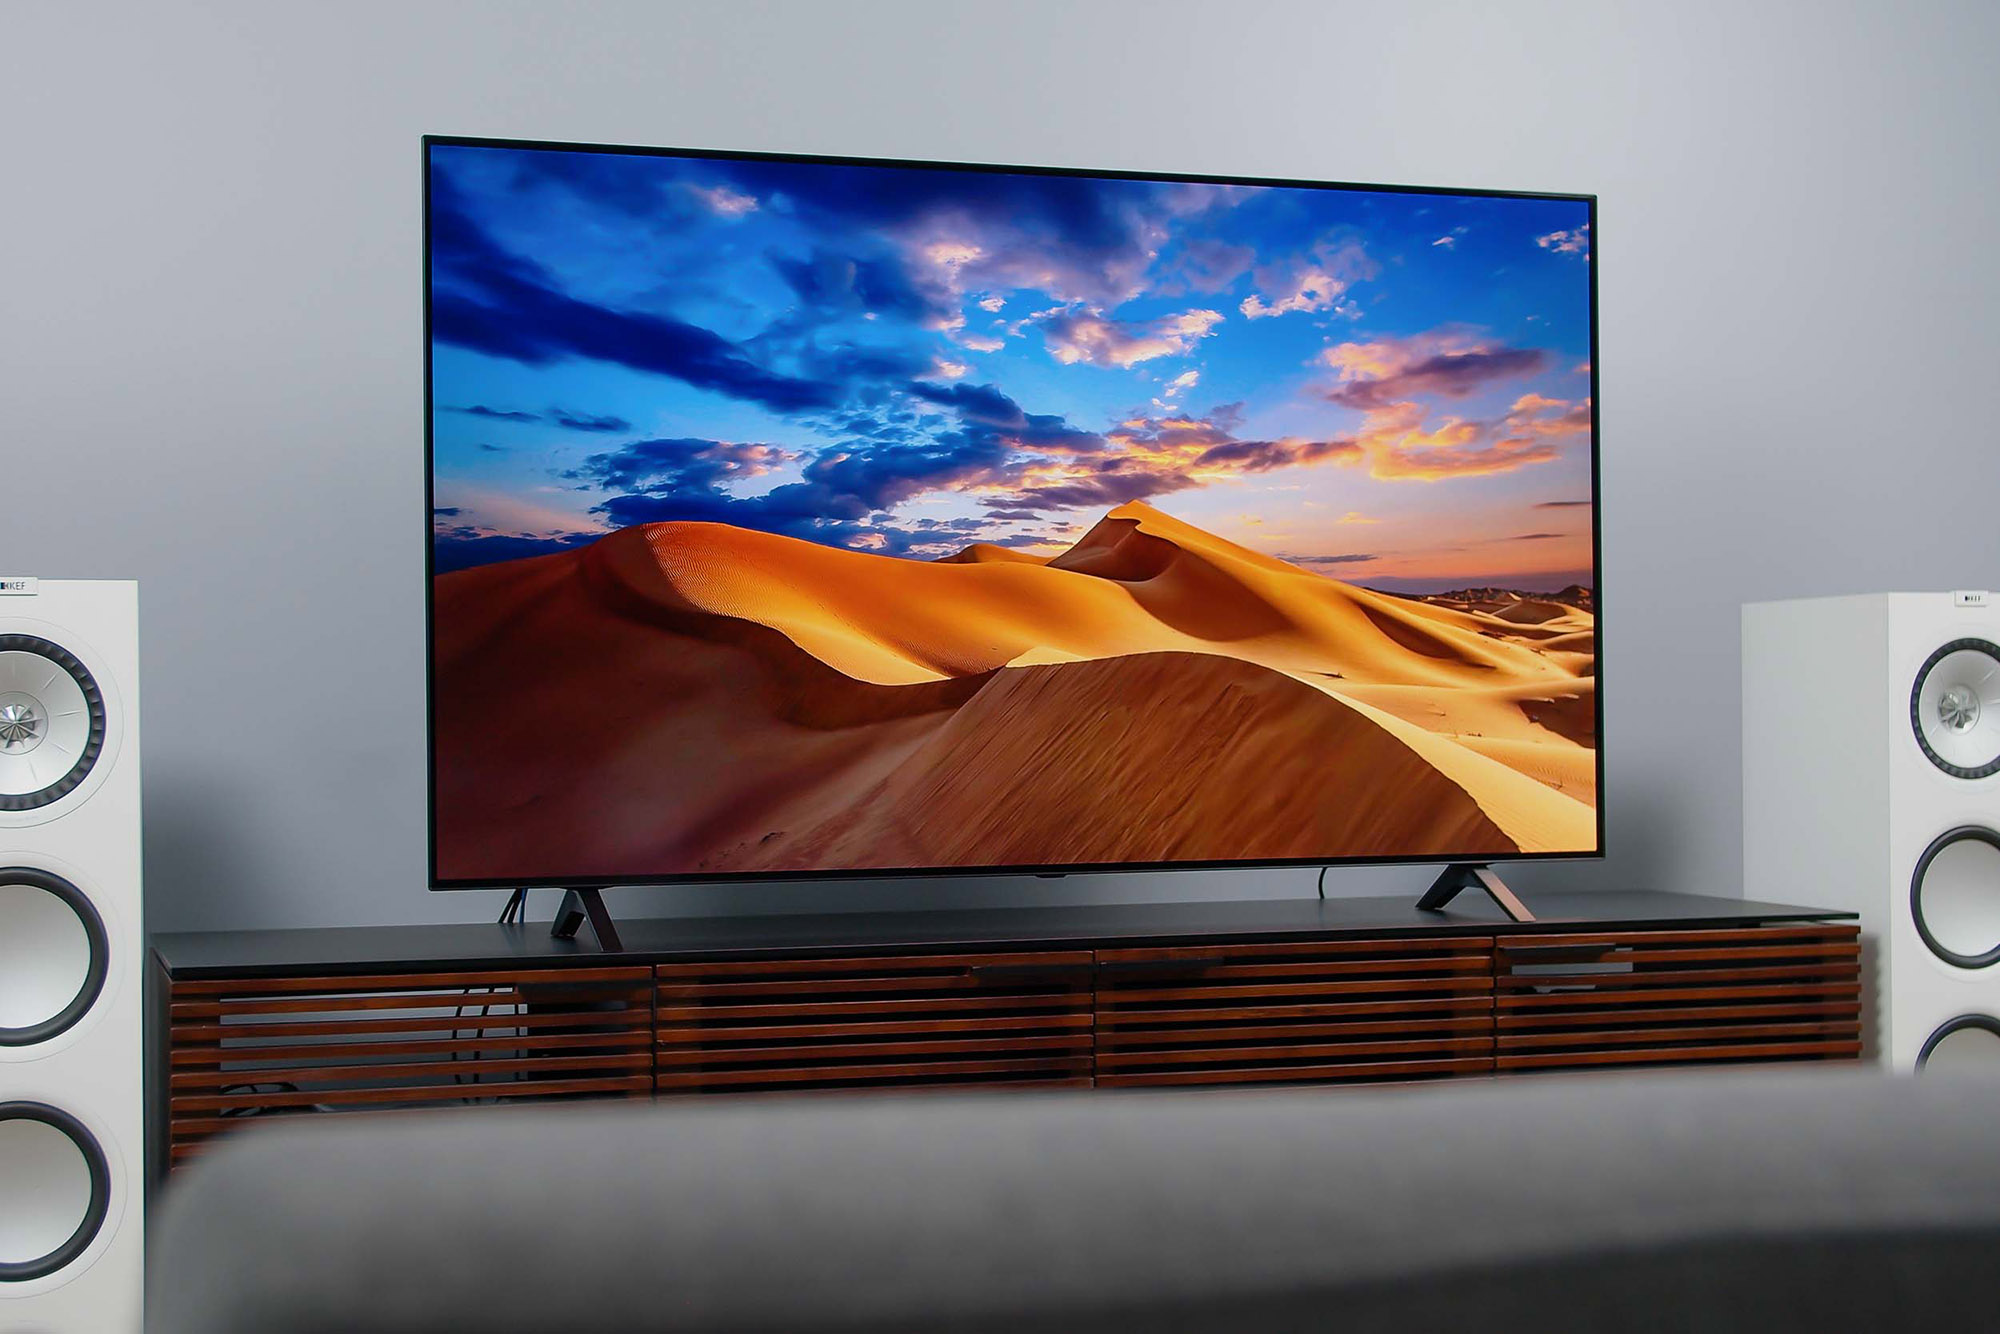 LG C3 OLED evo: UNBOXING AND FULL REVIEW - Brighter Panel and HDMI